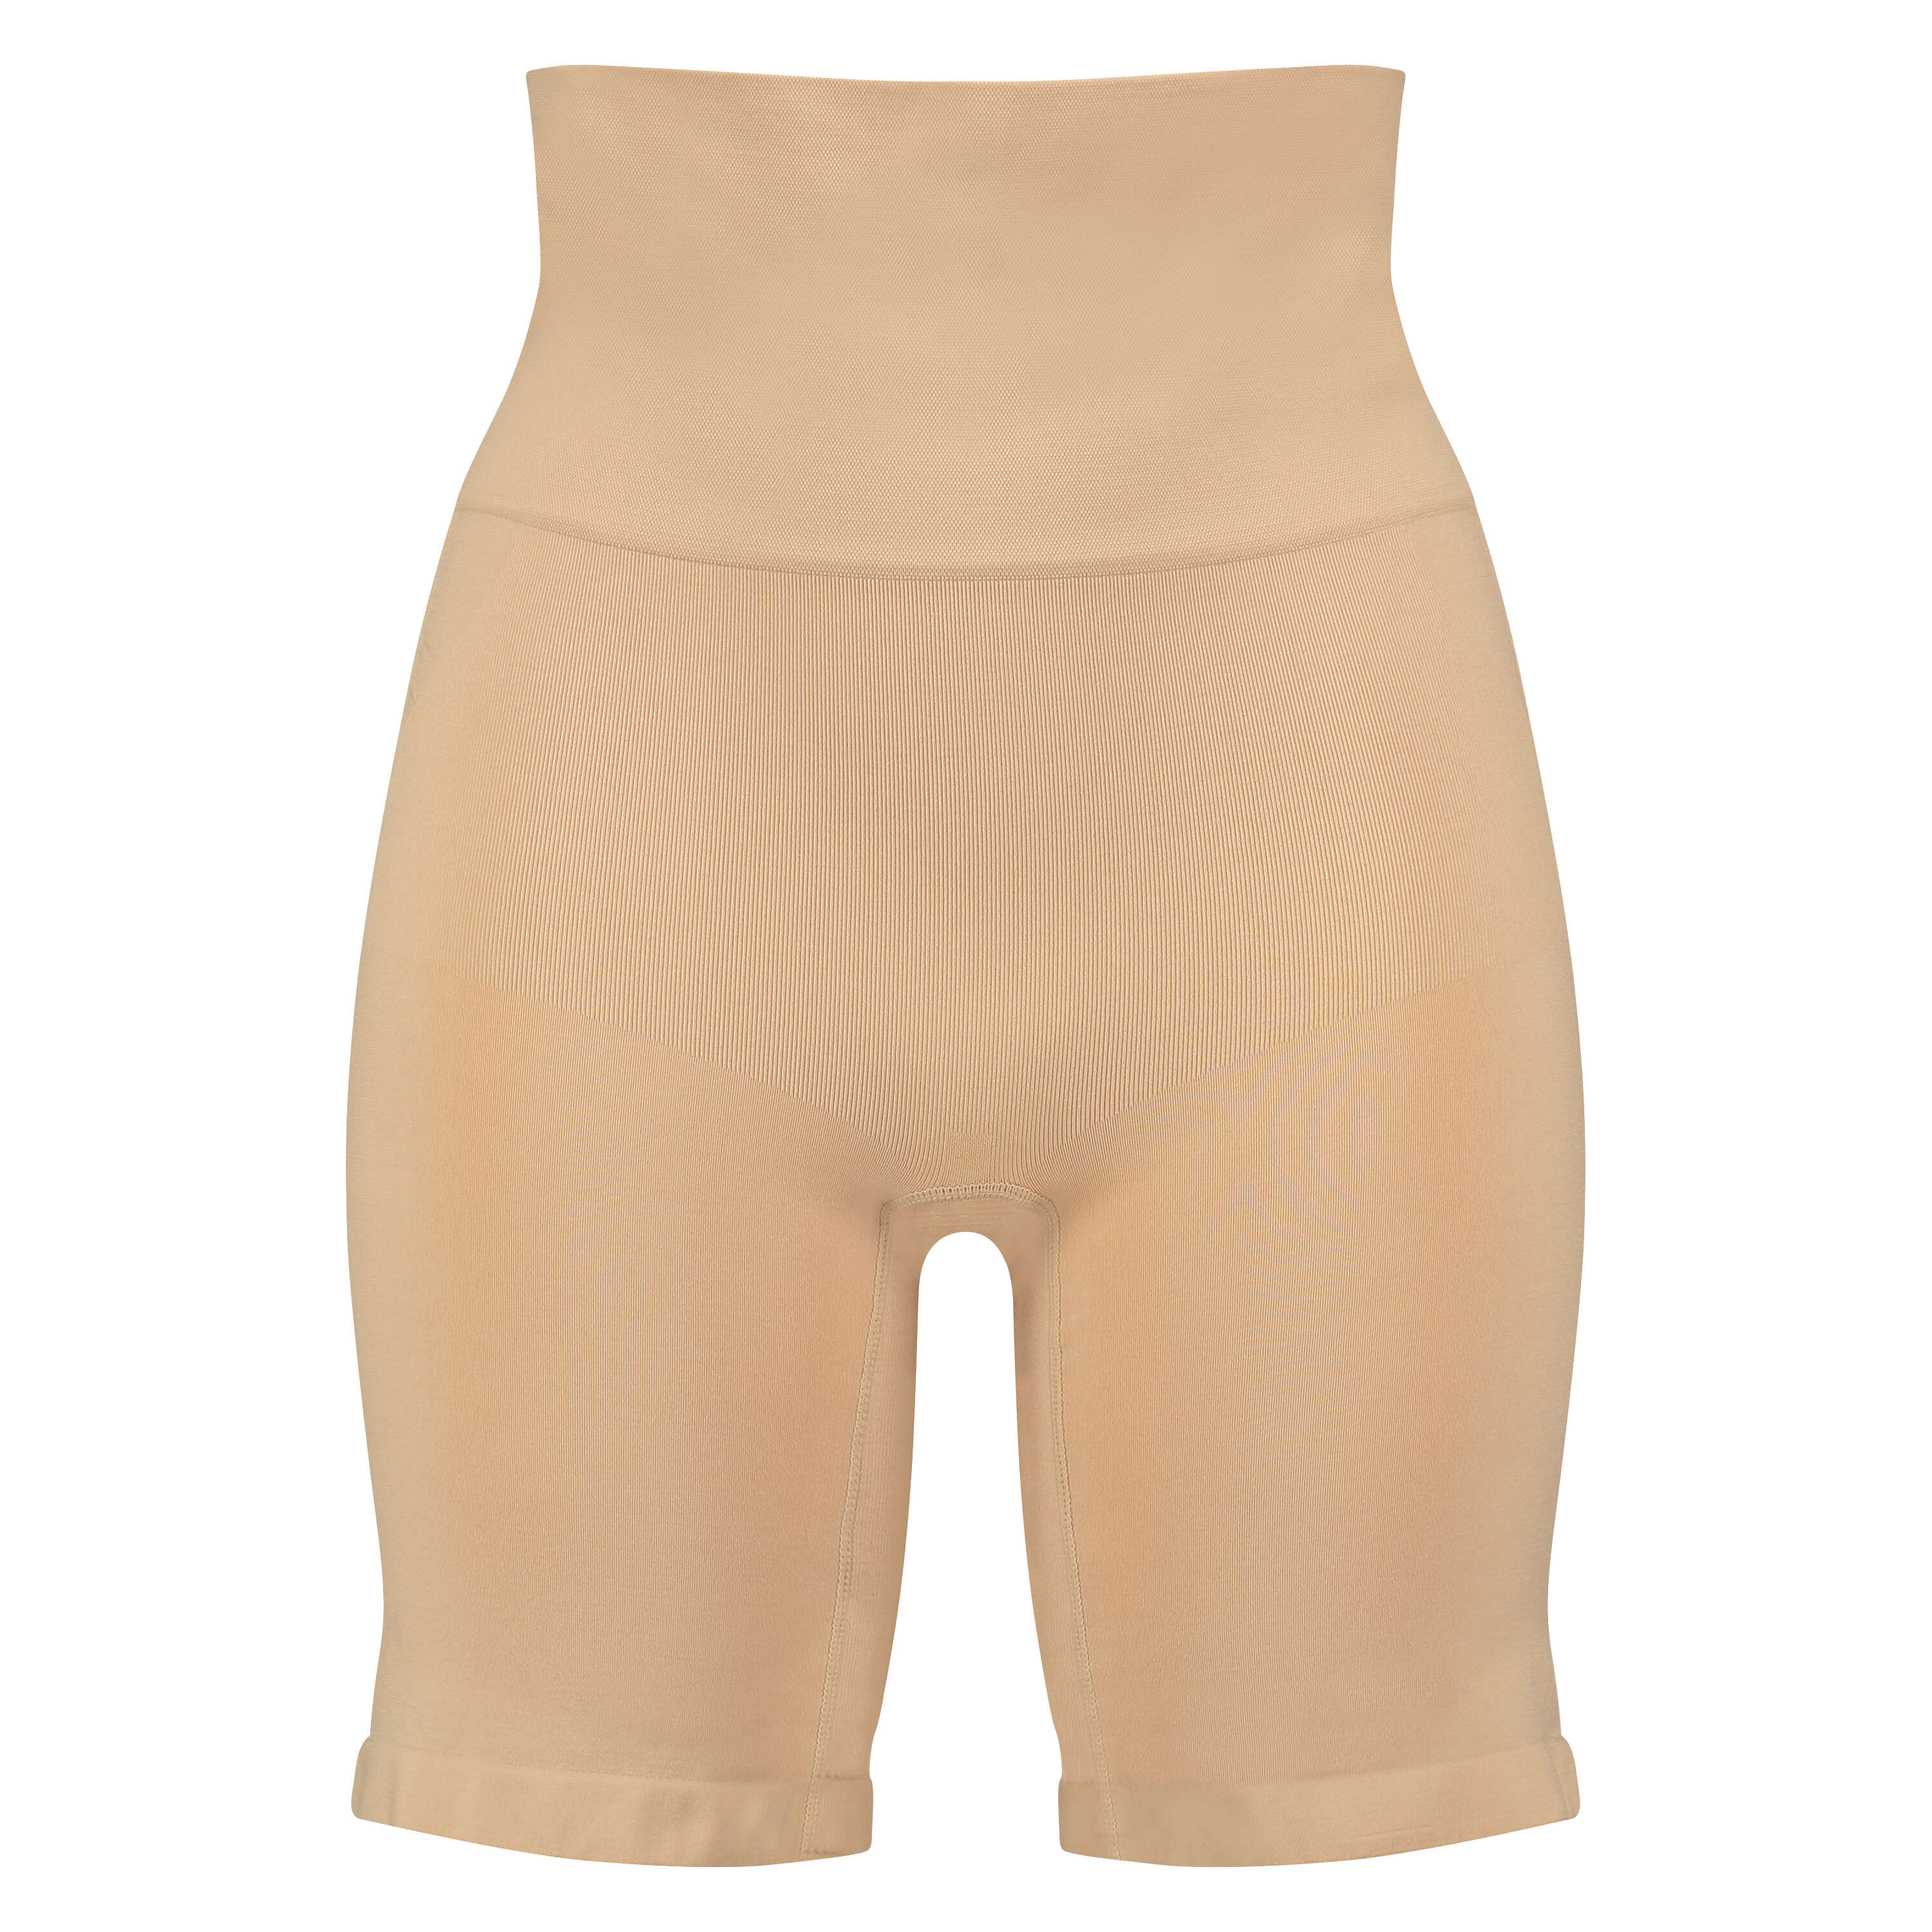 Firming high trousers - Level 2, Beige, main